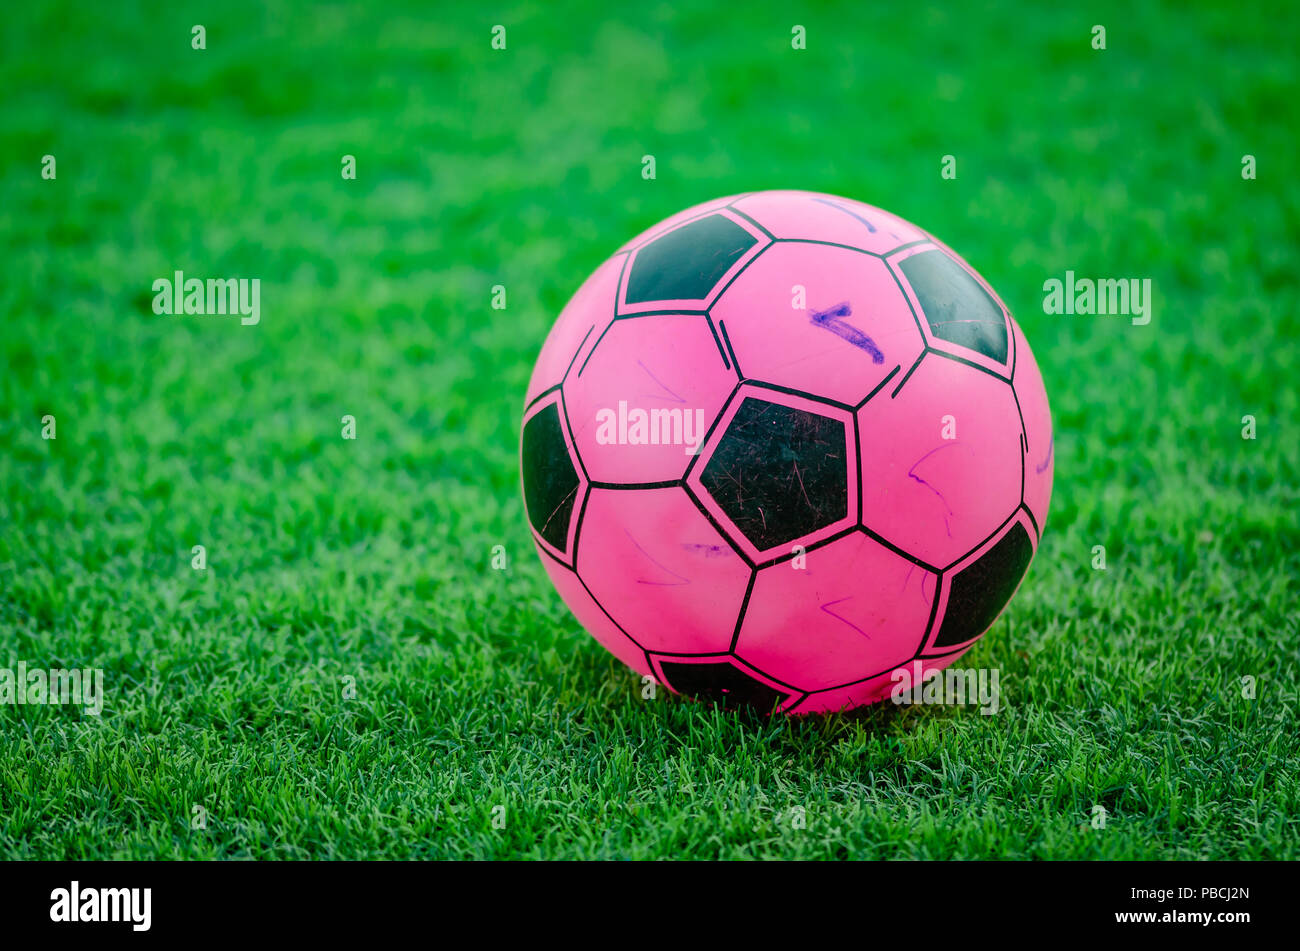 Old soccer ball with markings of children, on a football field. Stock Photo